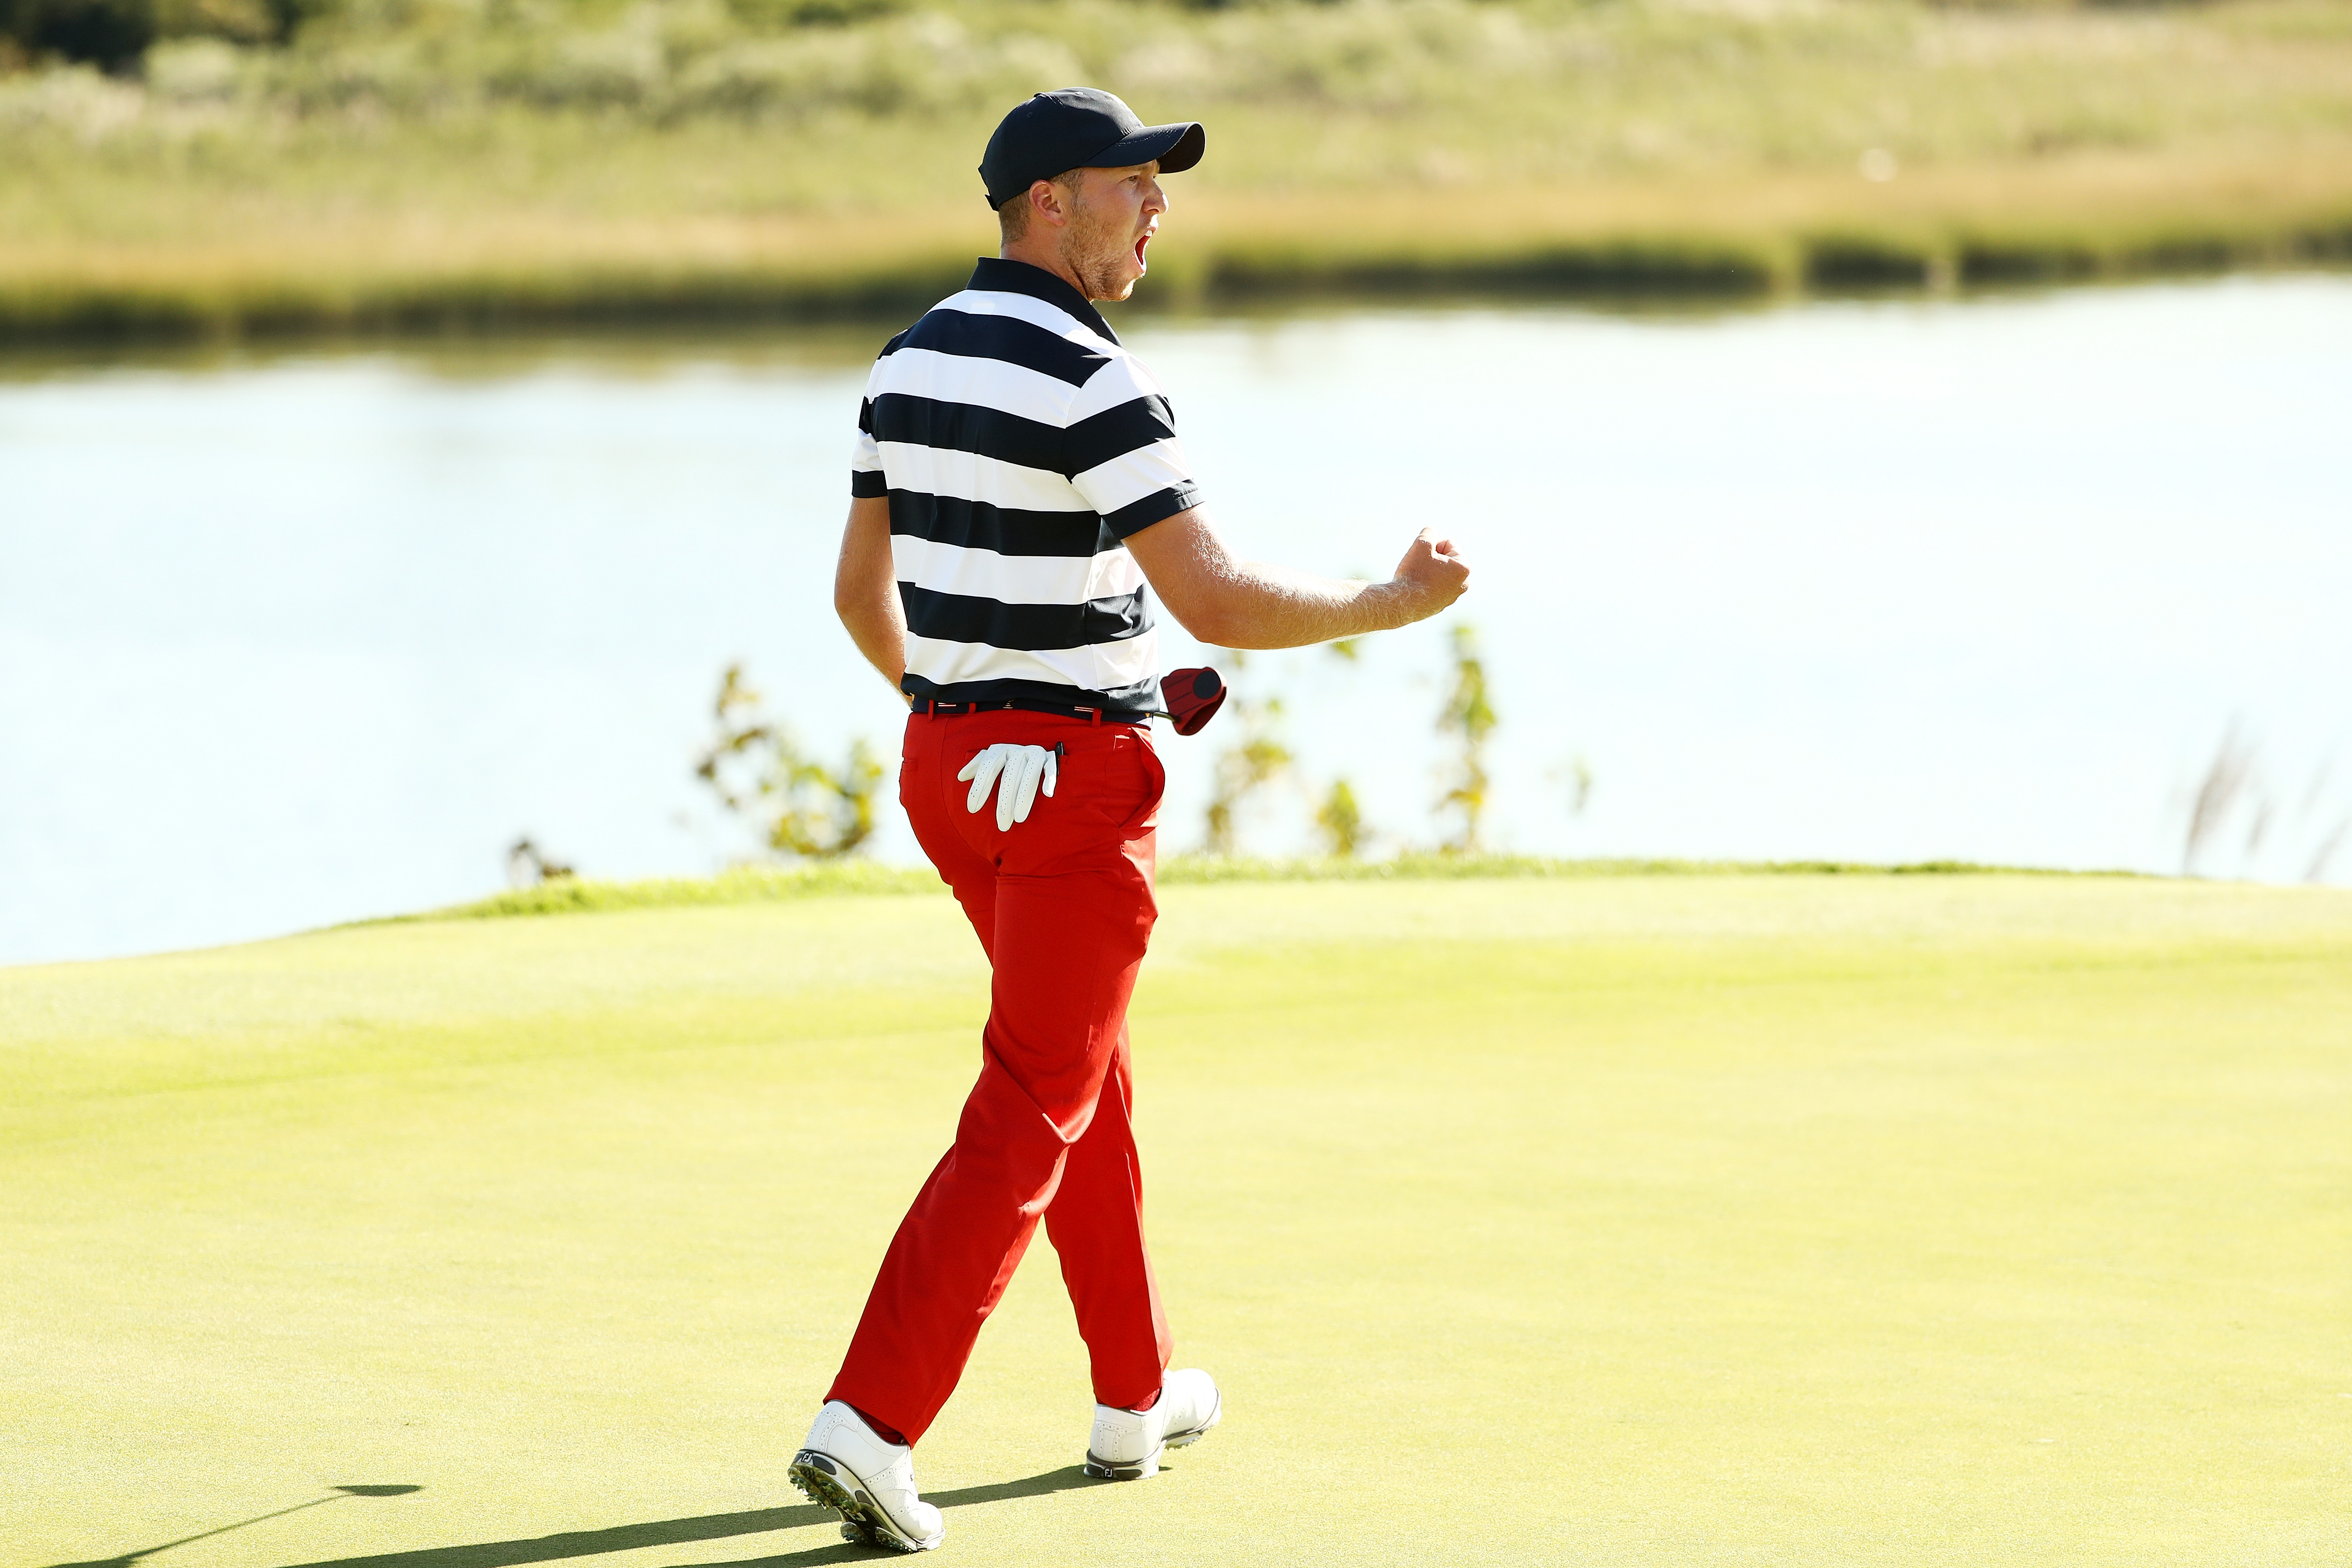 Presidents Cup 2017 Live updates -- Daniel Berger clinches cup for the Americans with halve at the 15th hole Golf News and Tour Information Golf Digest